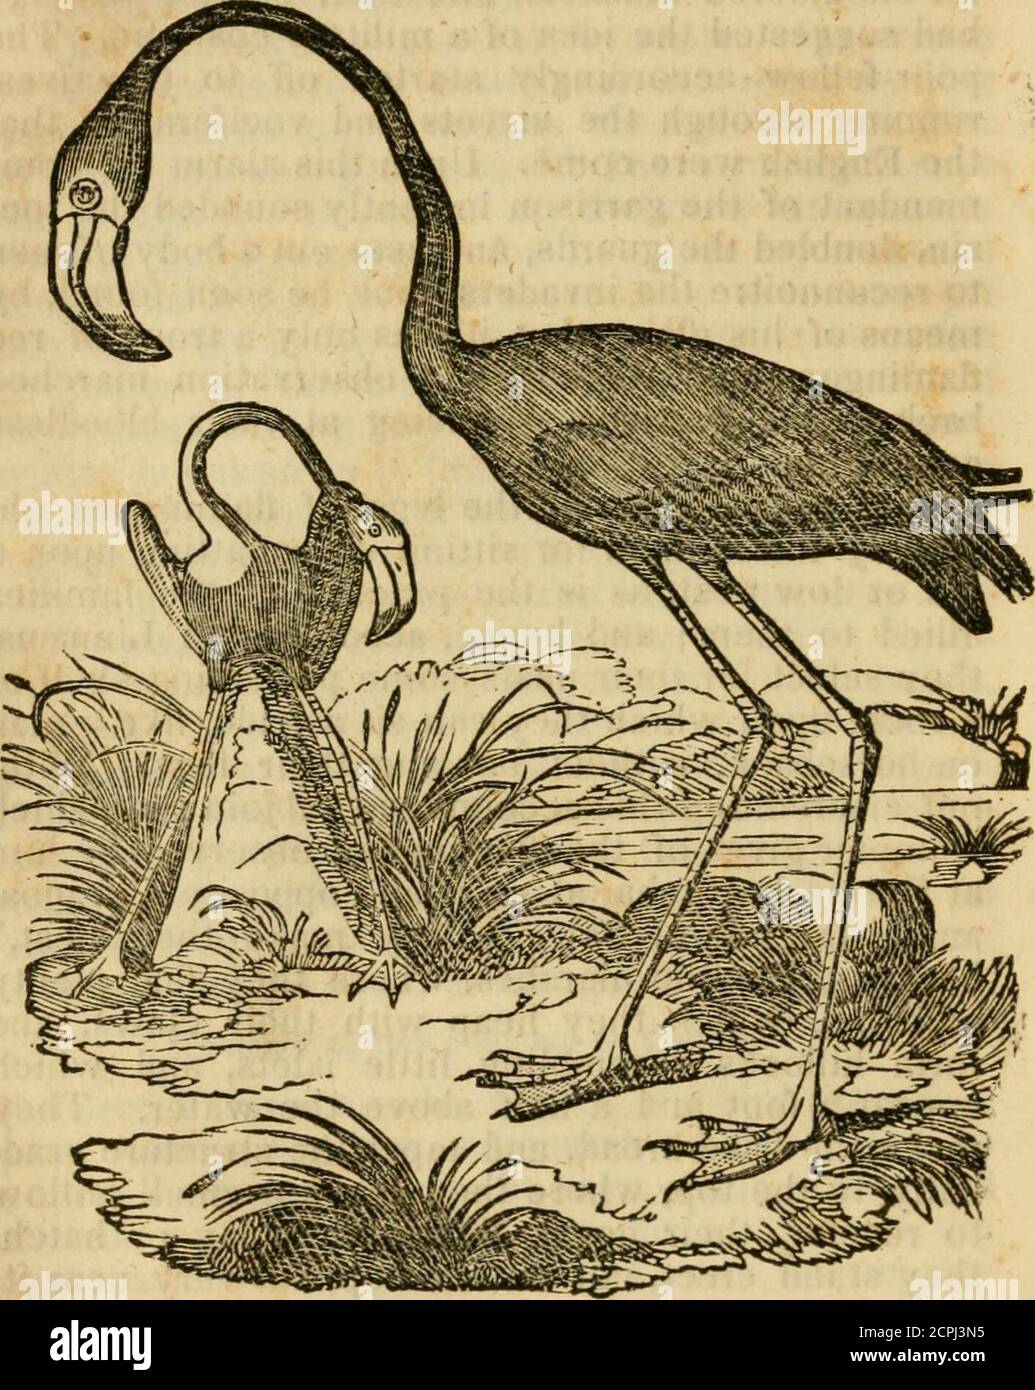 . Natural history of birds : their architecture habits and faculties . ng their legs. With-out discrediting this account, we subjoin that whichDampier gives of the flamingoes observed by himat Rio de la Hacha, at an island opposite Curacoa,and at the Isle of Sal. They make their nest,he says, in the marshes, where they find plentyof slime, which they heap with their claws, andform hillocks resembling little islets, and whichappear a foot ard a half above the water. Theymake the base broad, and taper the structure grad-ually to the top, where they leave a small hollowto receive their eggs. When Stock Photo